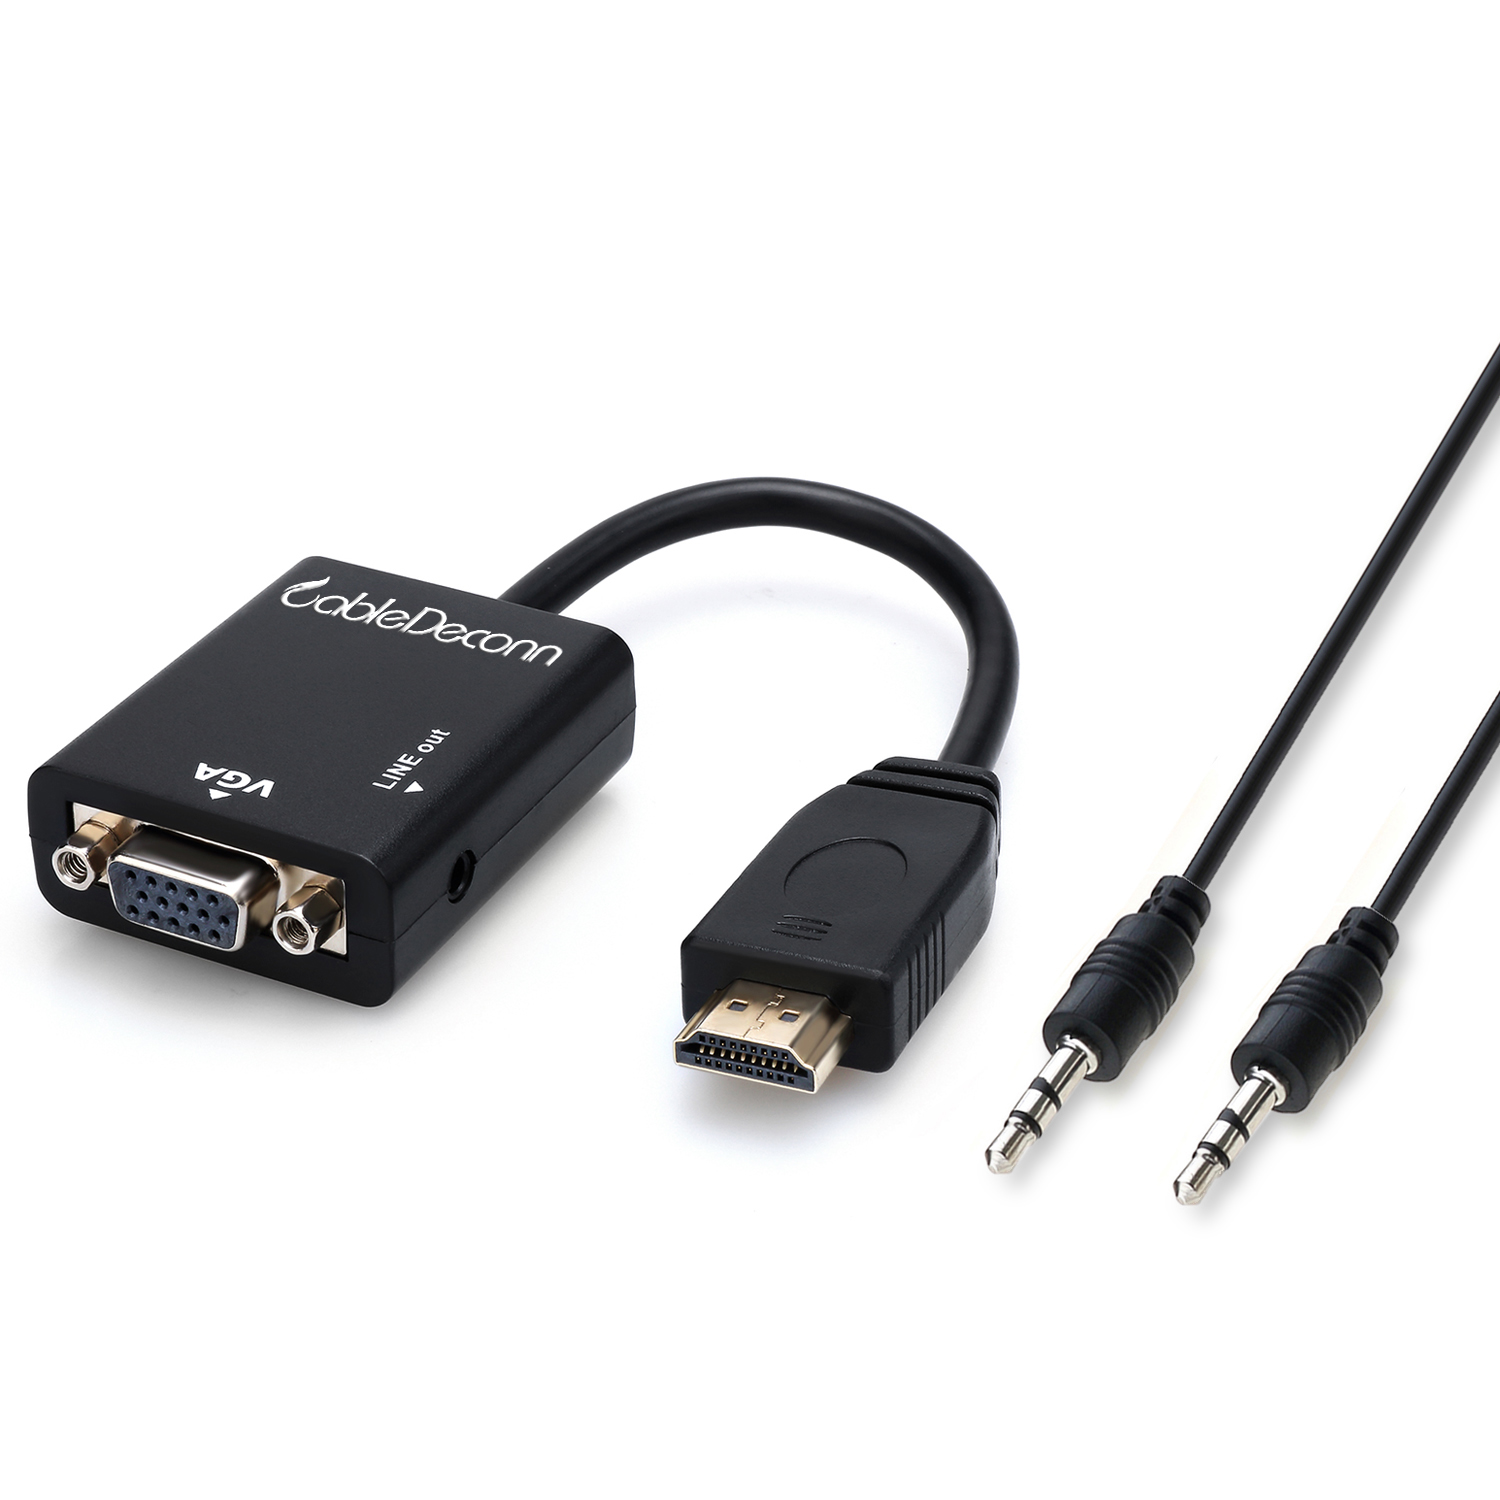 Kustlijn Bedachtzaam Ongrijpbaar CABLEDECONN 3 In1 HDMI Male to VGA Adapter Convertor Cable + Micro HDMI to  HDMI + Mini HDMI to HDMI with Audio Output F0101-HDMI Adapter-CableDeconn